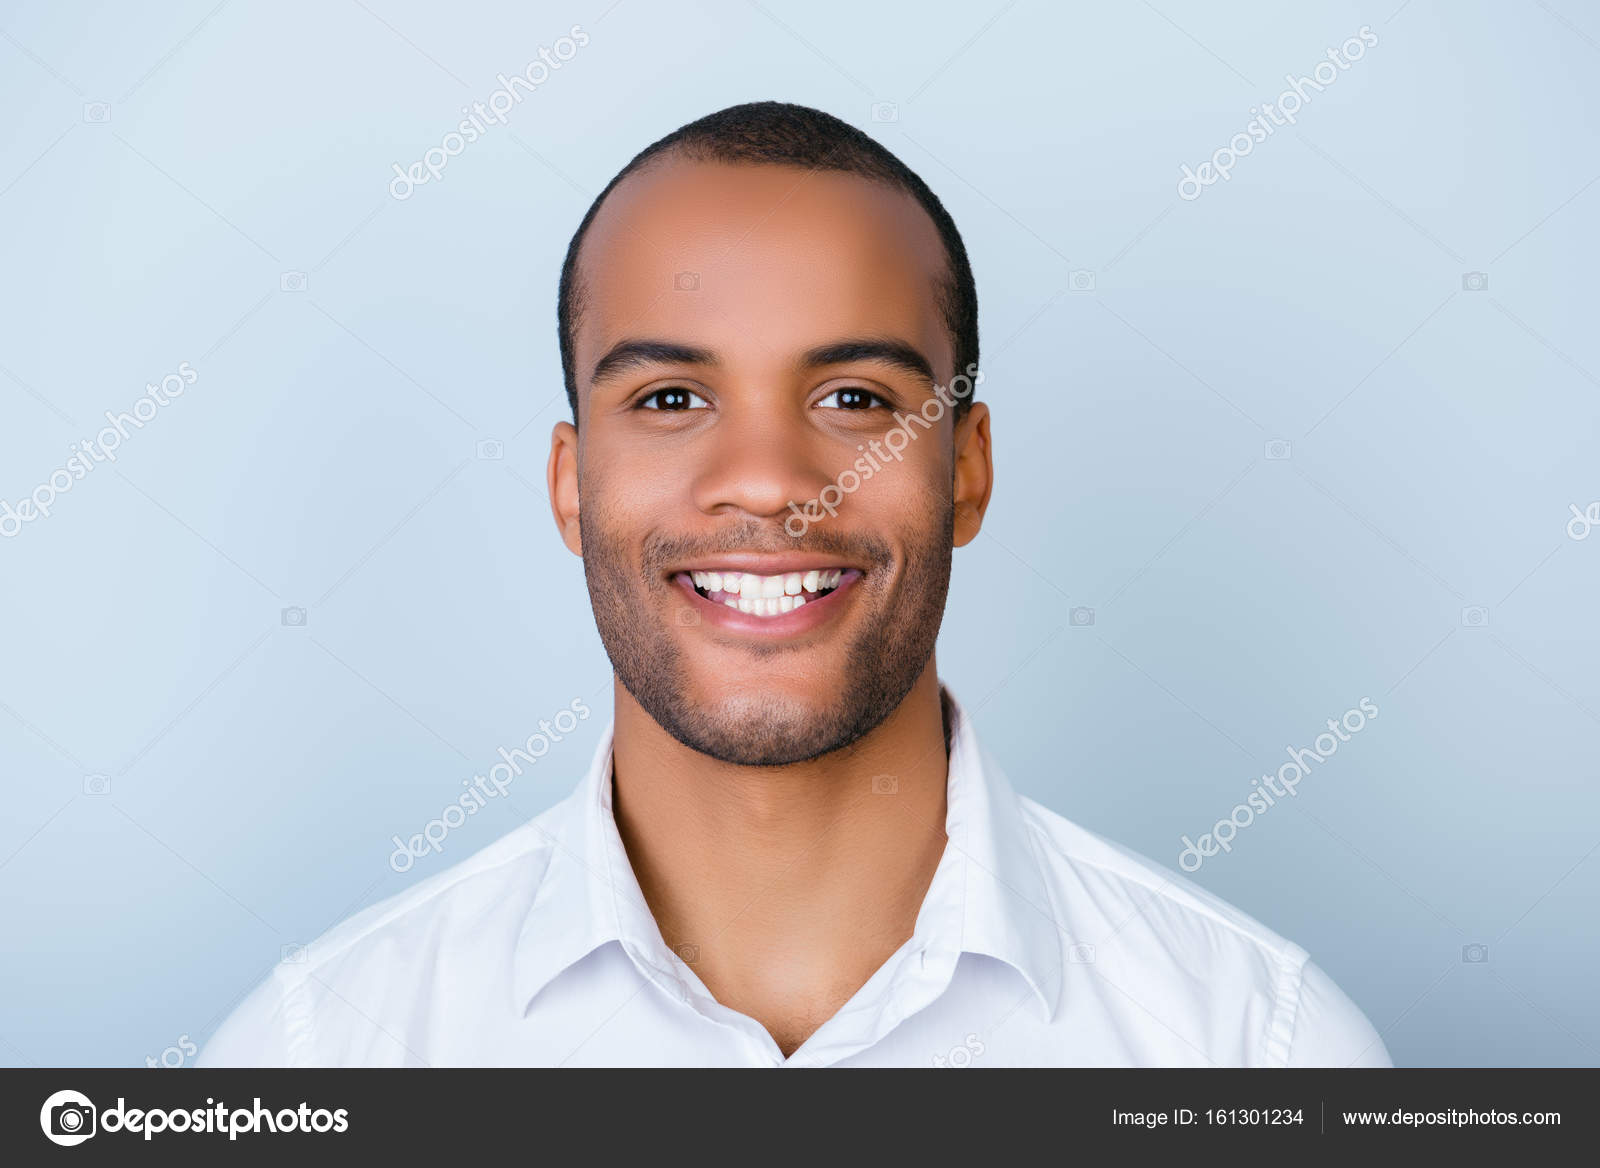 depositphotos_161301234-stock-photo-successful-excited-young-mulatto-african.jpg